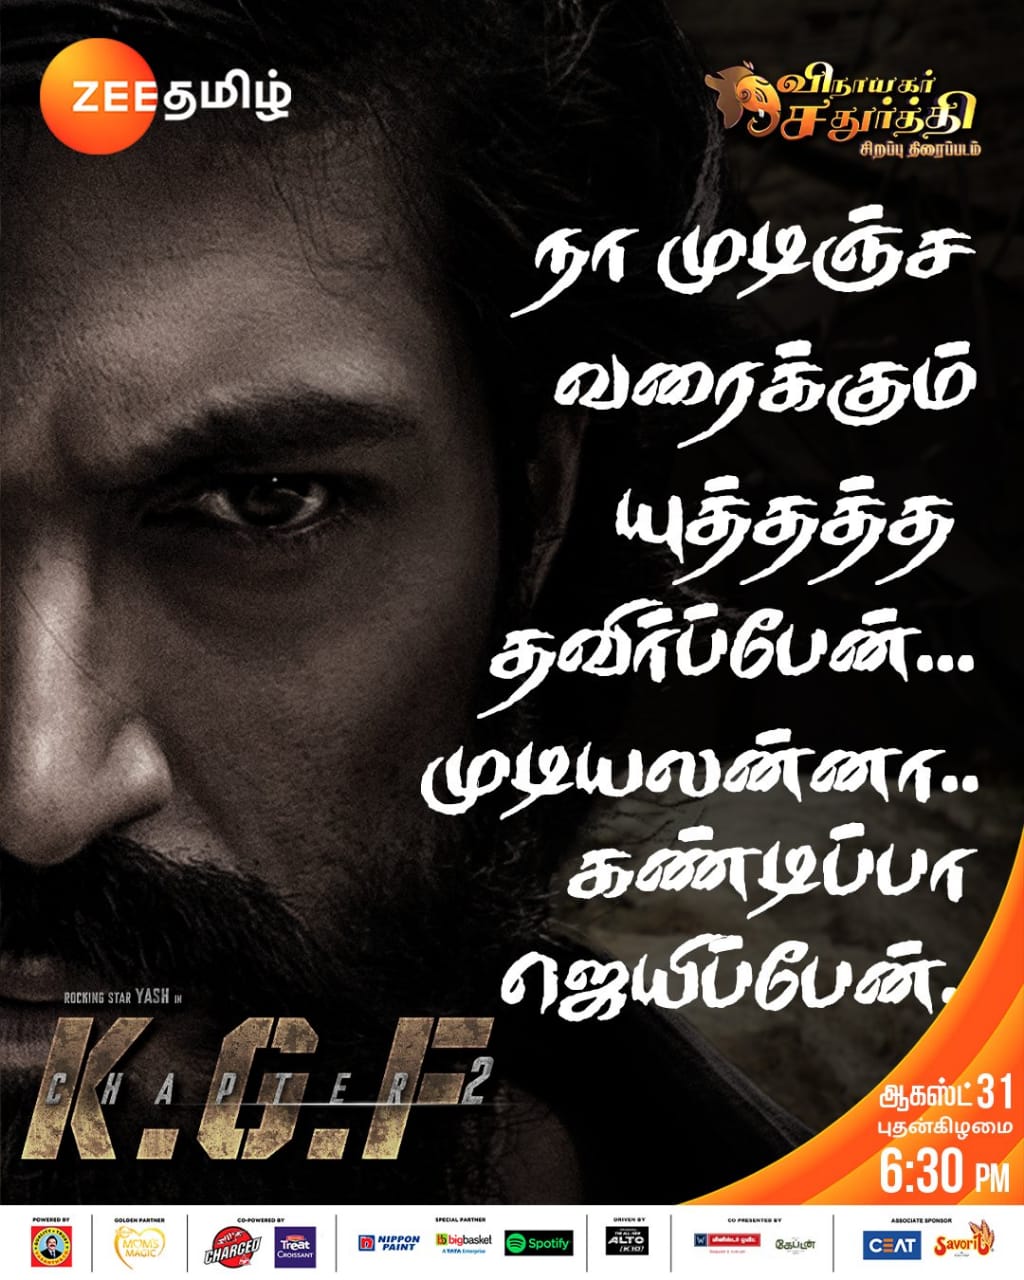 KGF Chapter 2 Tamil World Television Premiere on Zee Tamil